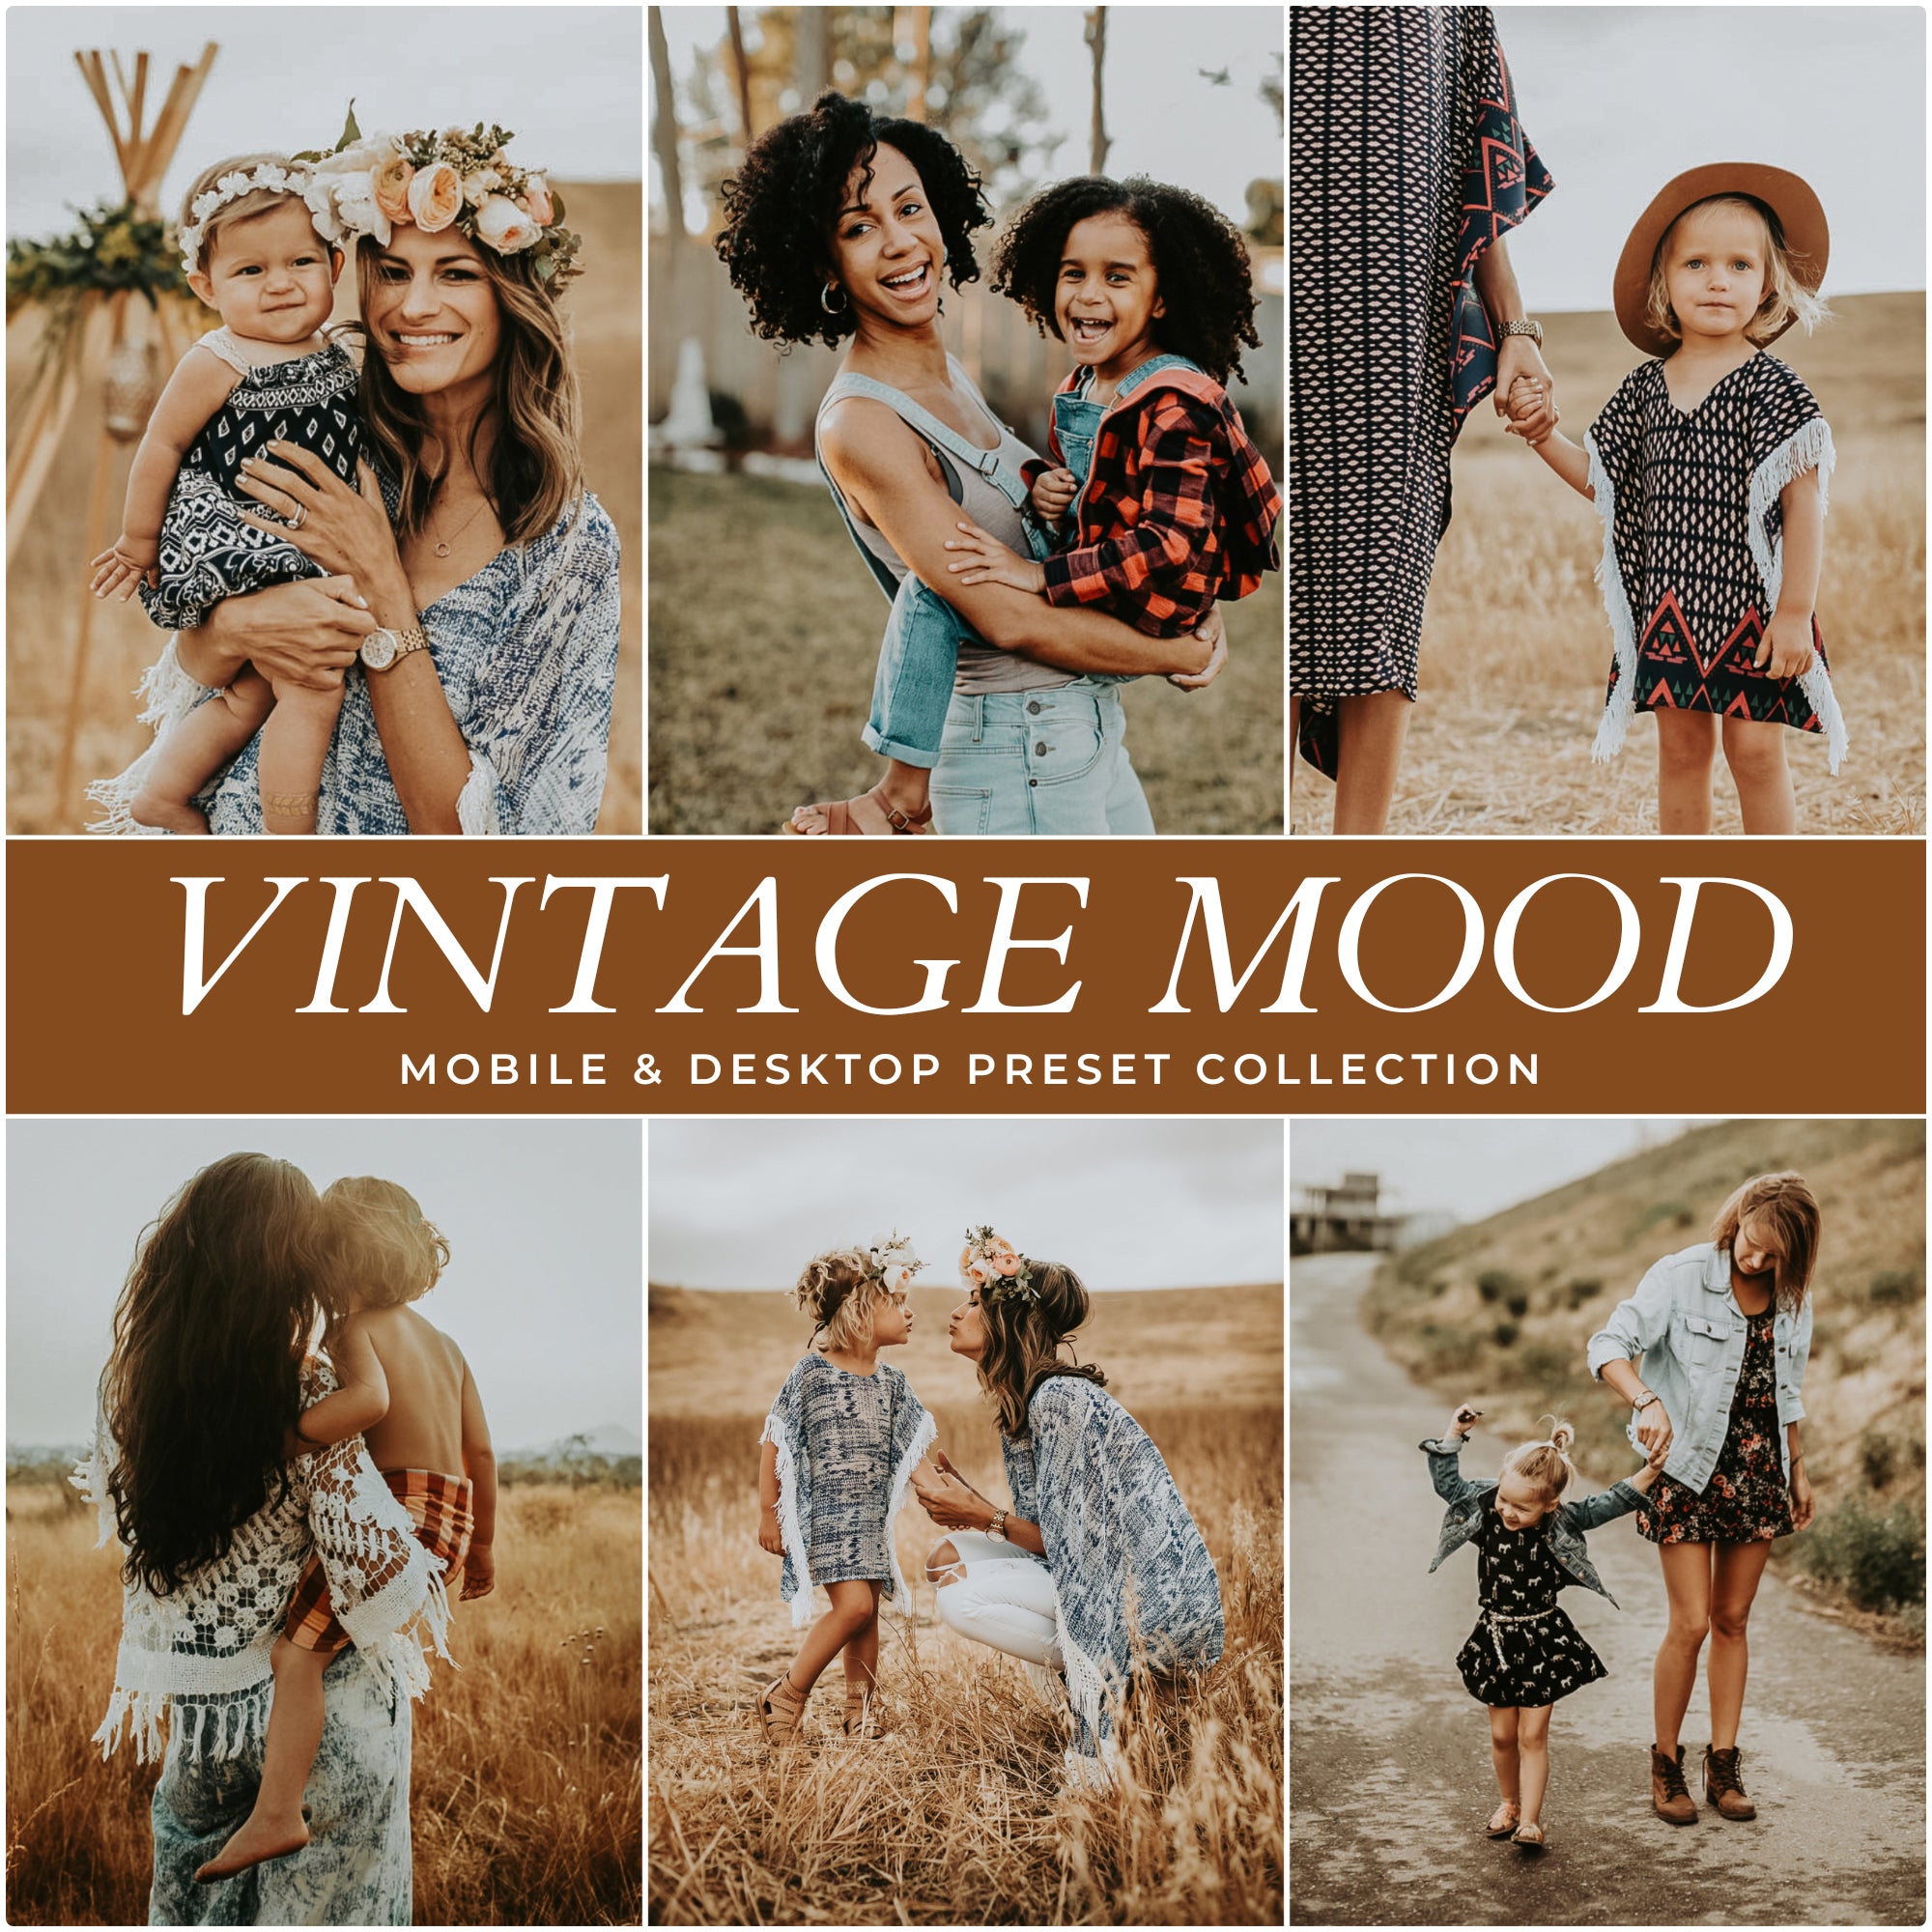 Vintage Moody Lightroom Presets For Photographers and Instagram Influencers Photo Editing In Adobe Lightroom By Lou And Marks Presets